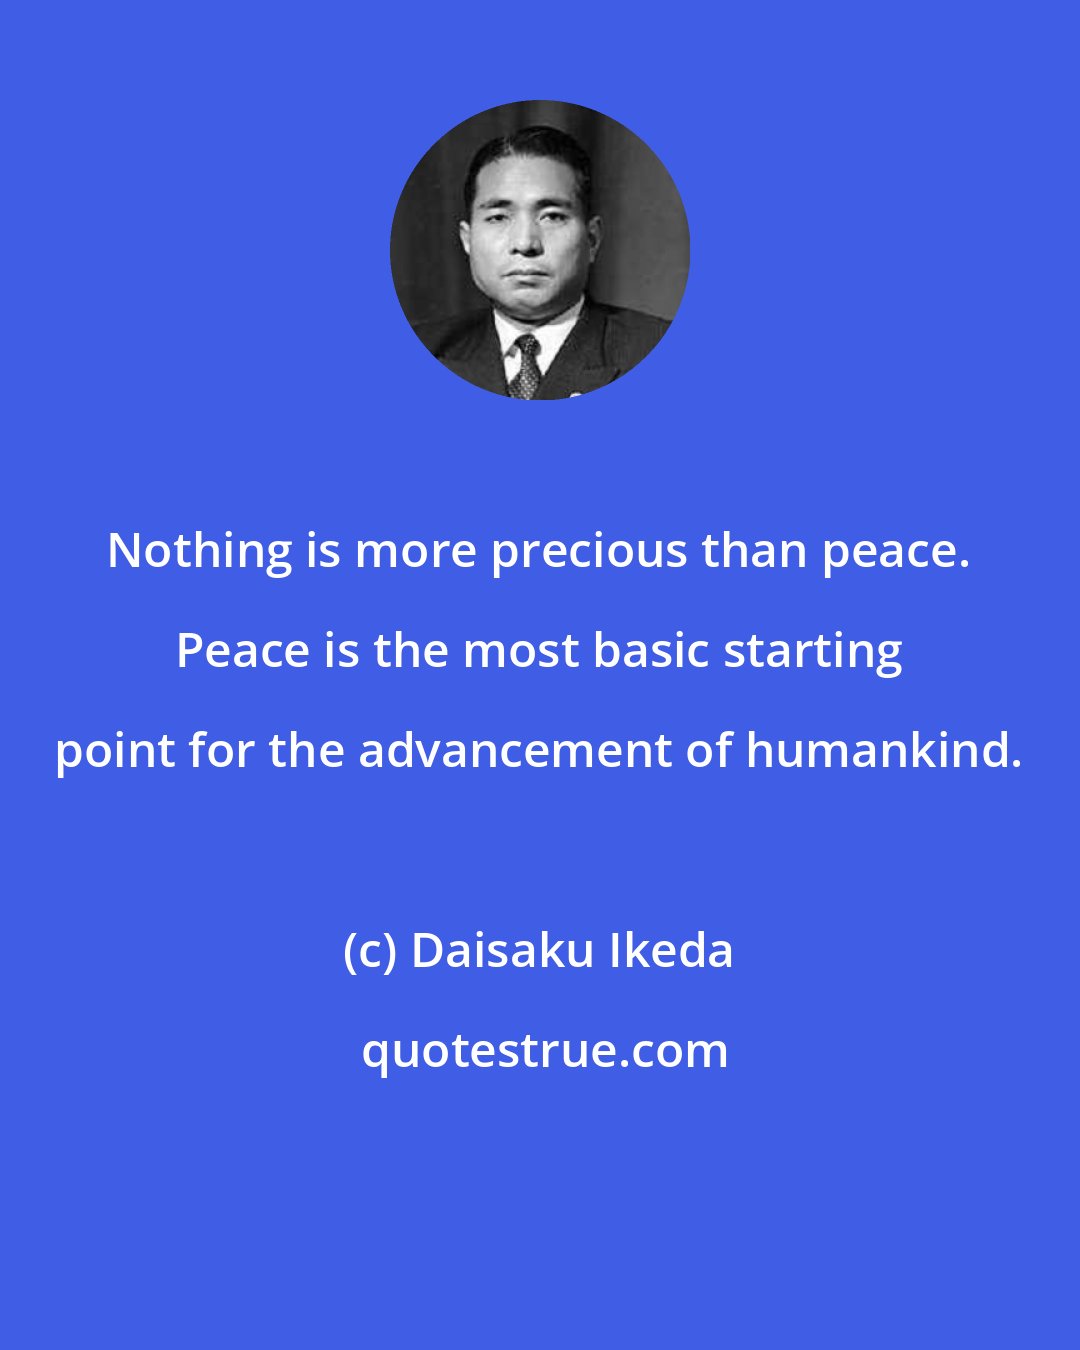 Daisaku Ikeda: Nothing is more precious than peace. Peace is the most basic starting point for the advancement of humankind.